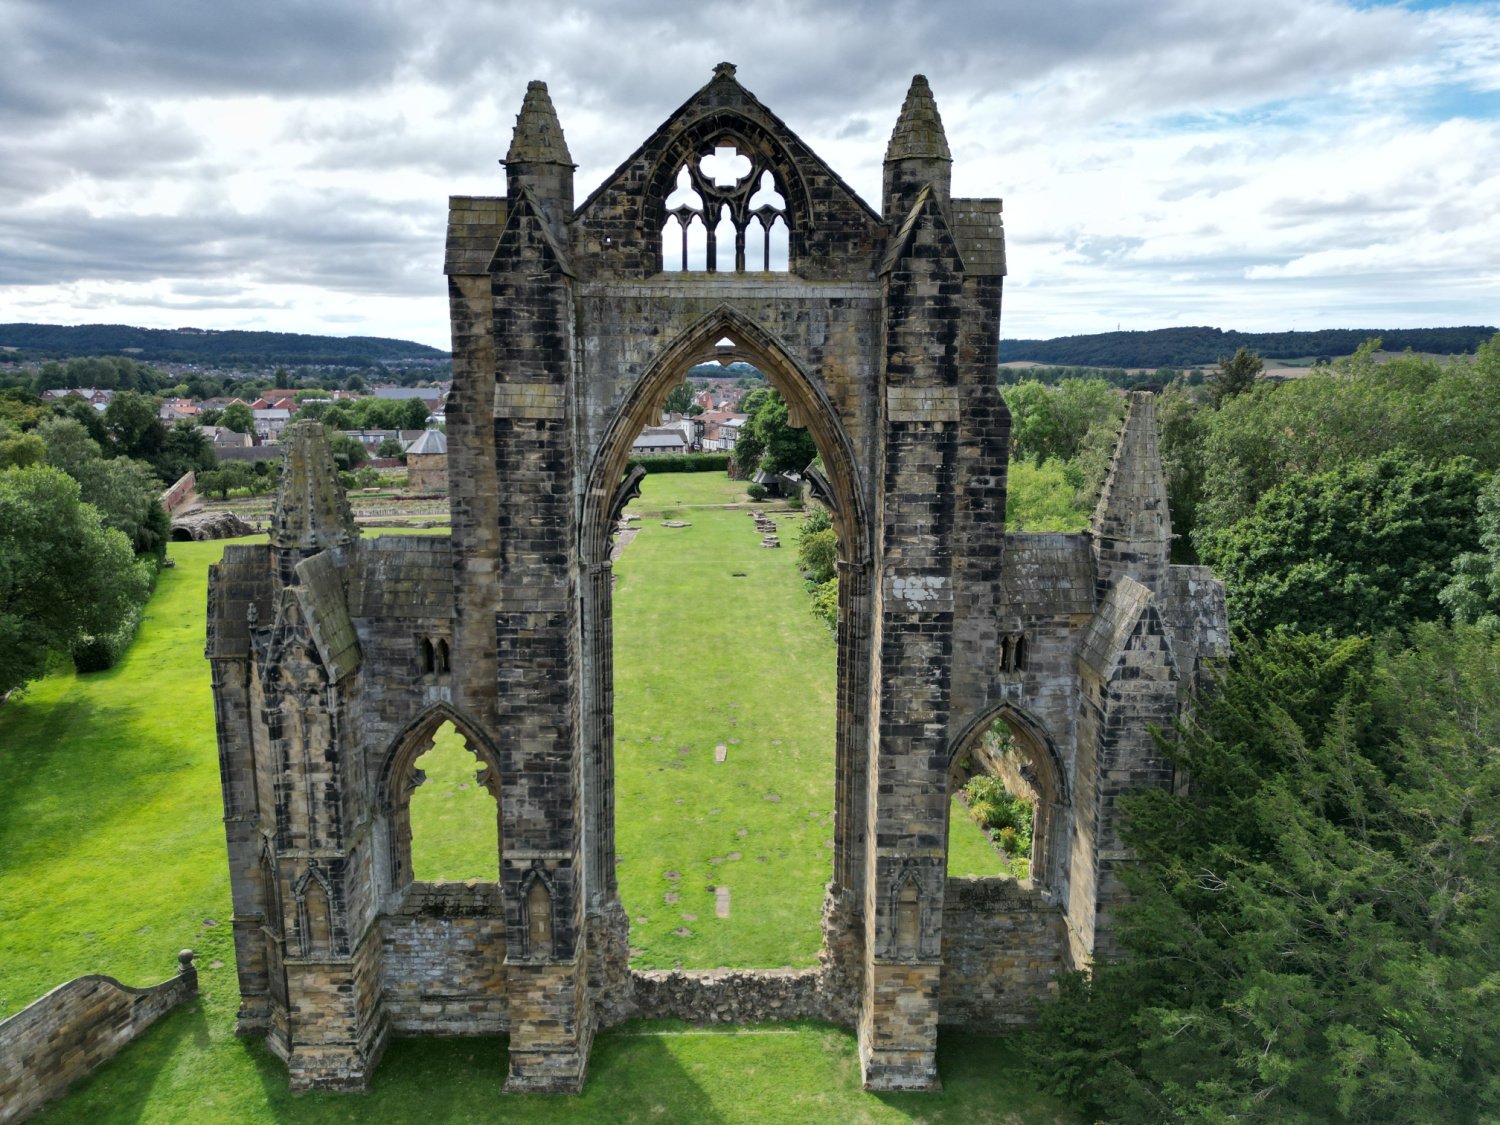 Image name guisborough priory north yorkshire the 18 image from the post A look at the history of Guisborough Priory, with Dr Emma Wells in Yorkshire.com.